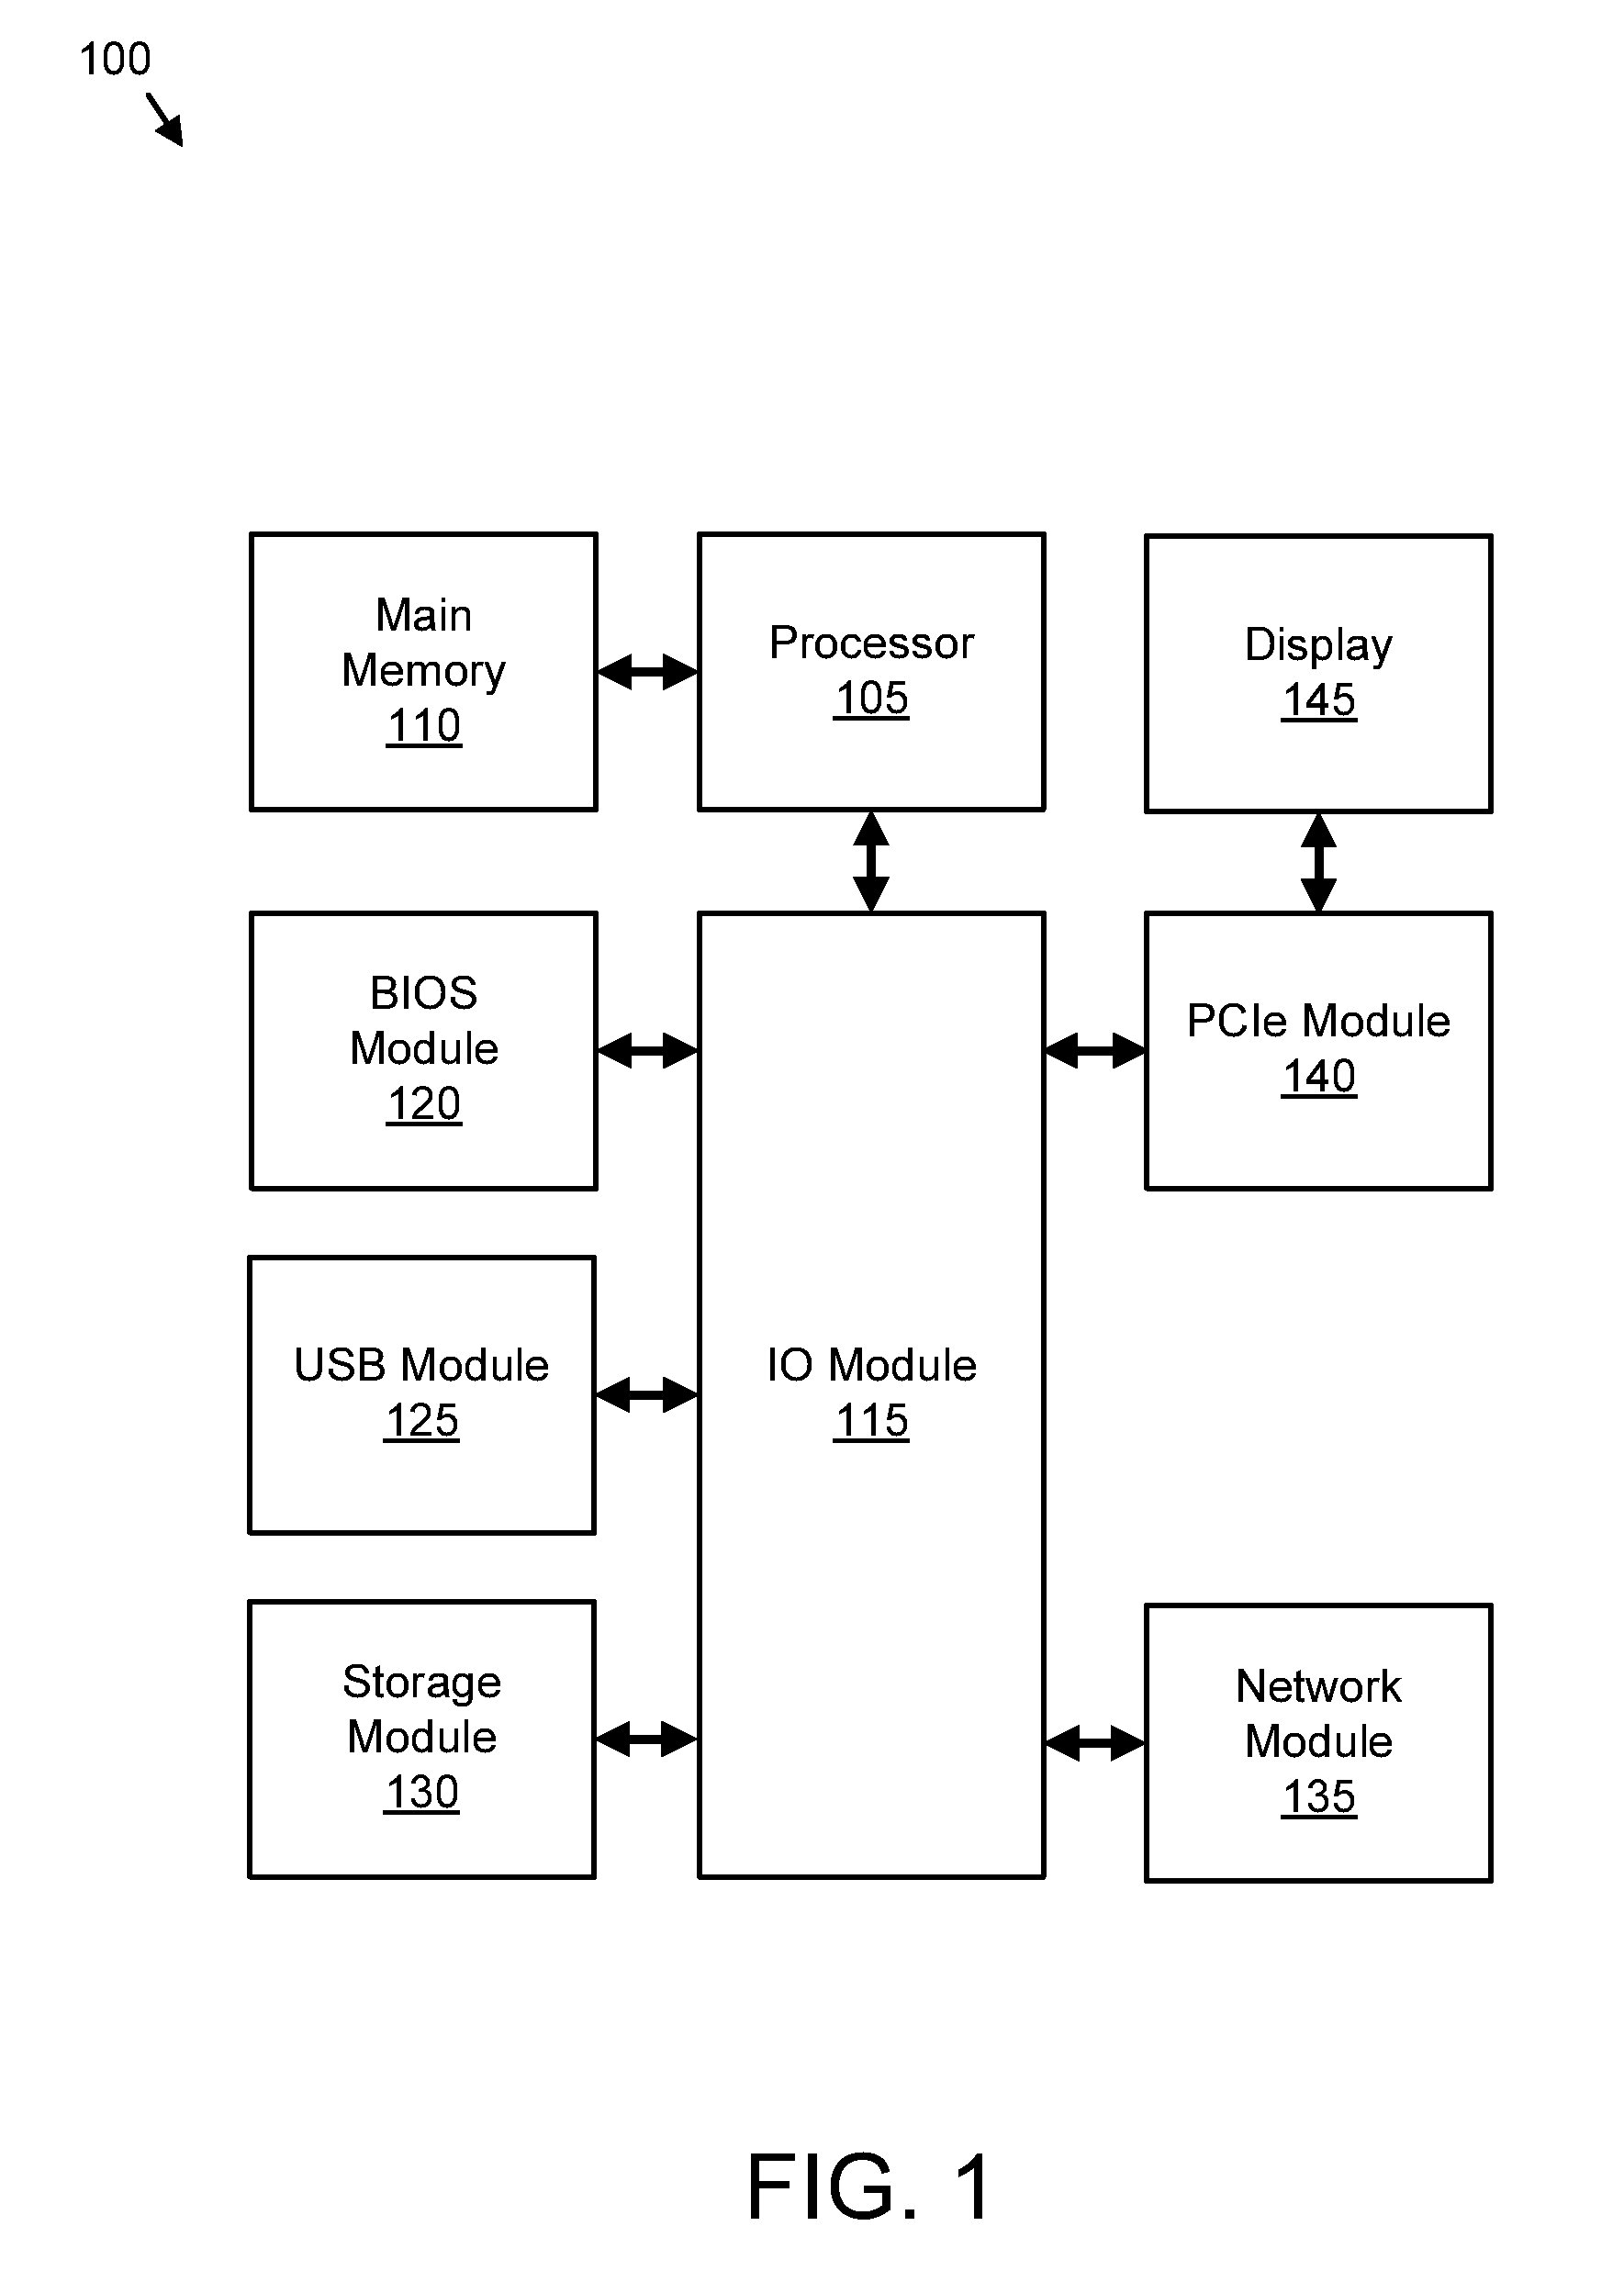 Detecting a touch event using a first touch interface and a second touch interface